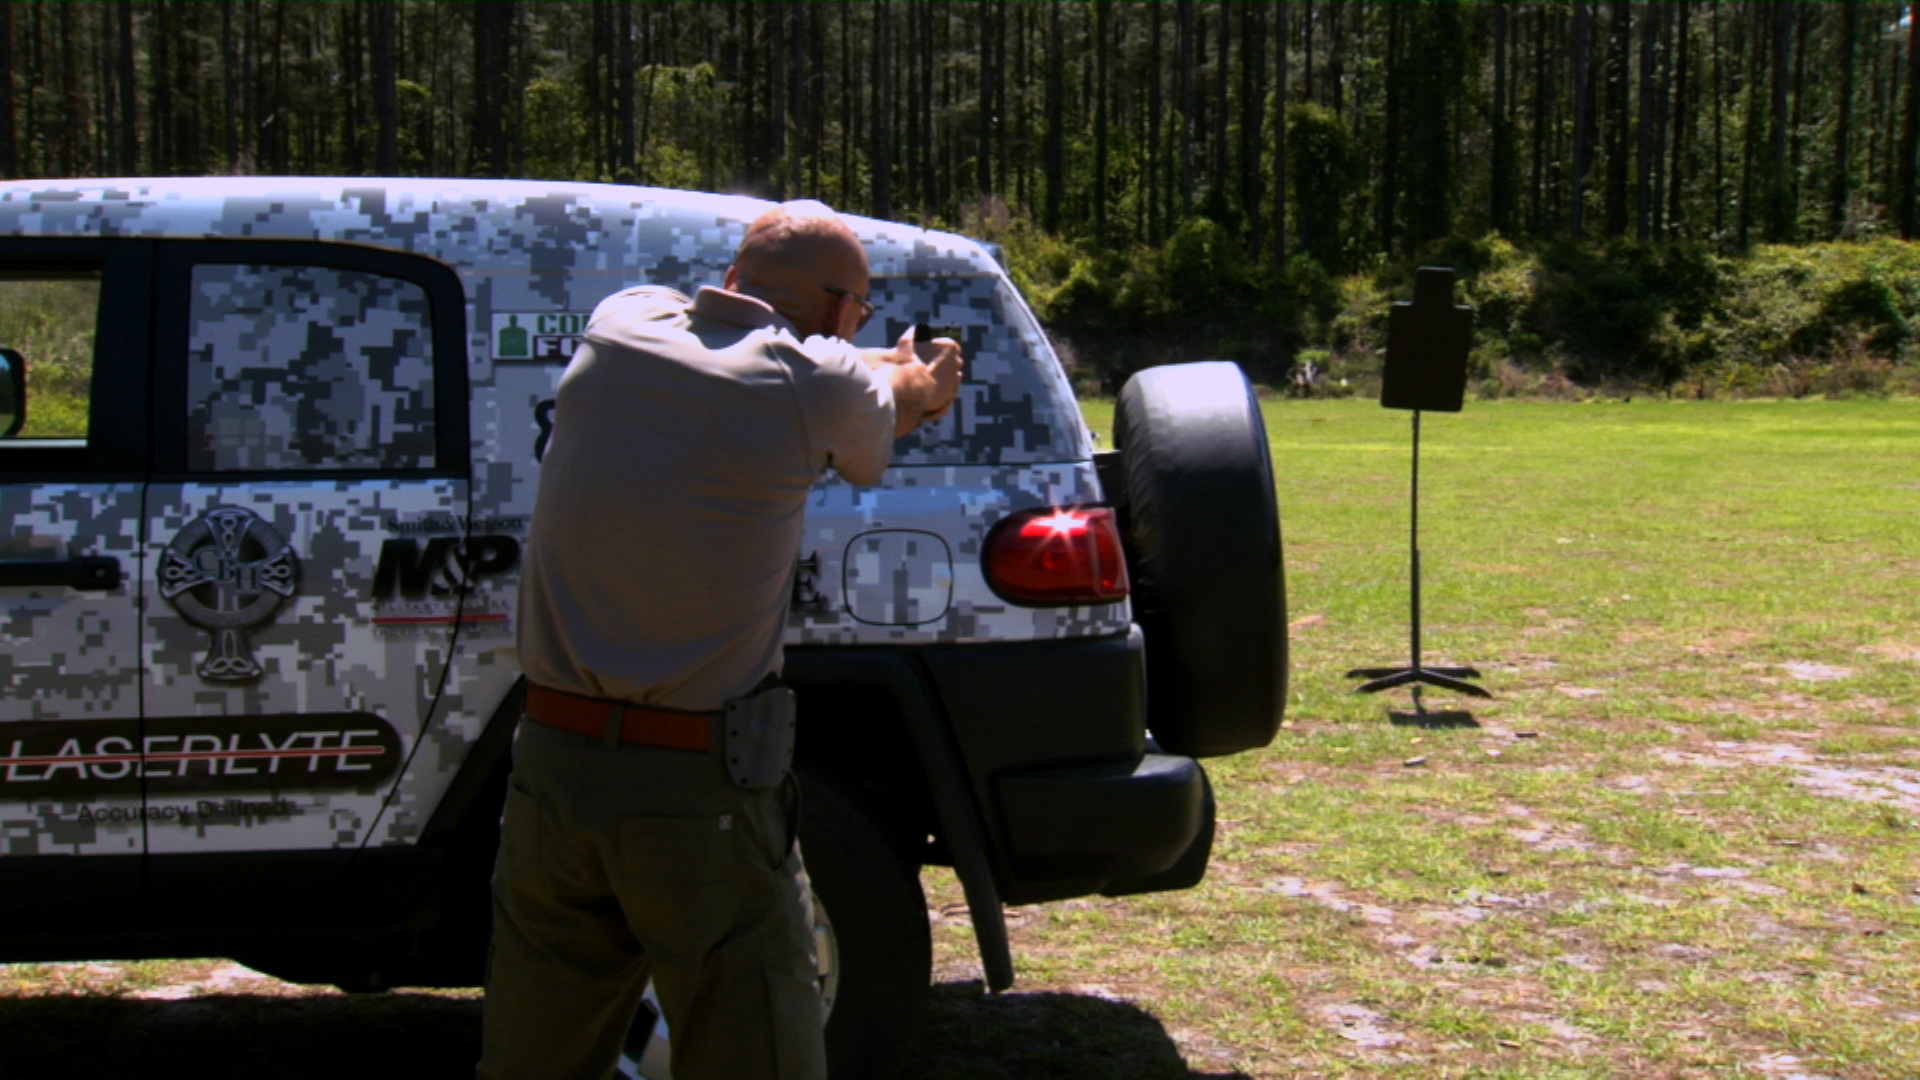 Part 1. Active Shooter Response: Drills for Defensive Shooting product featured image thumbnail.